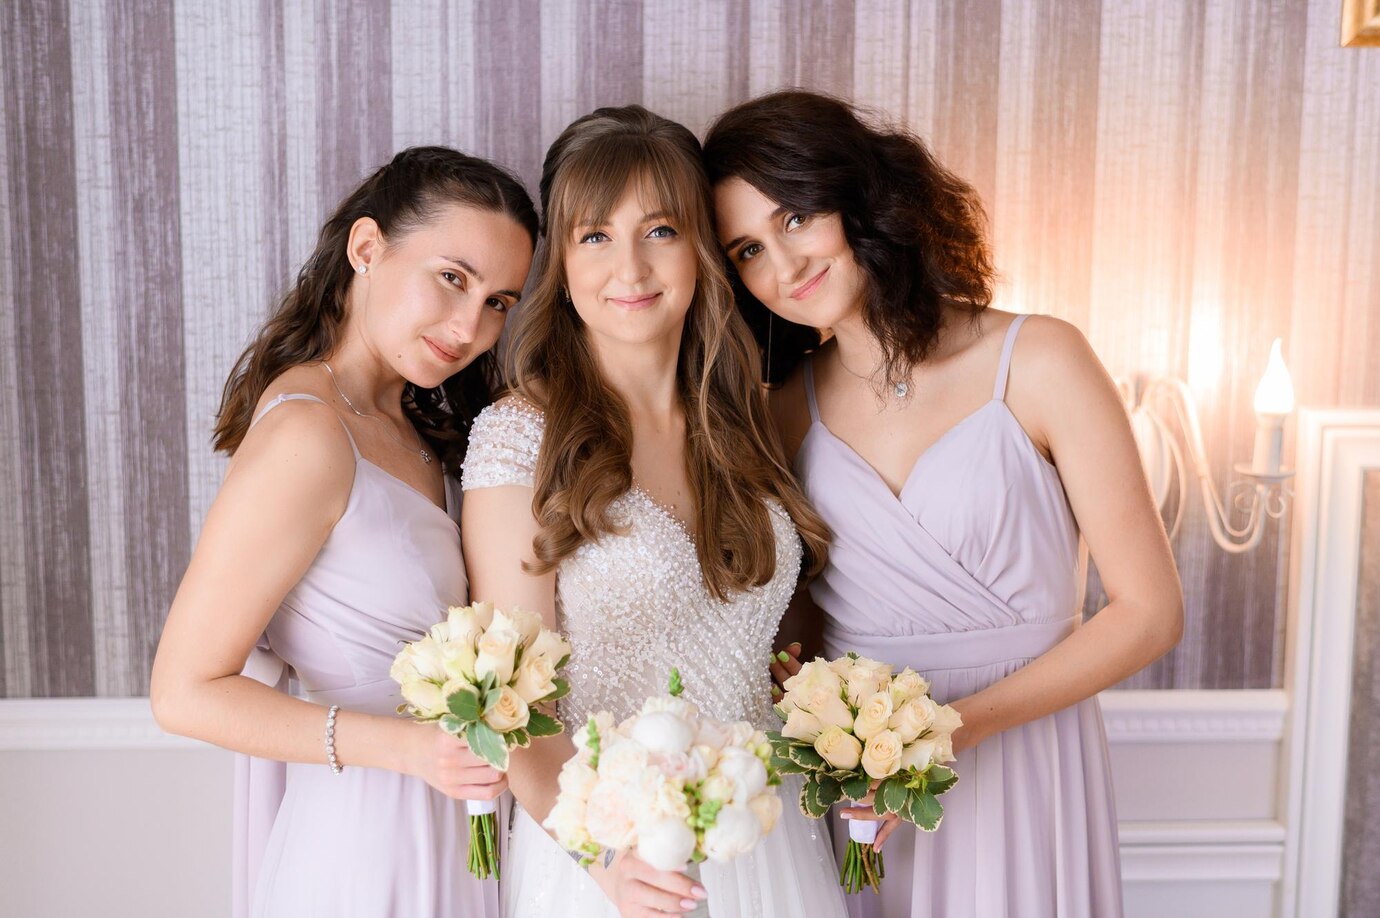 How To Prepare Yourself Before Your Sister's Big Day